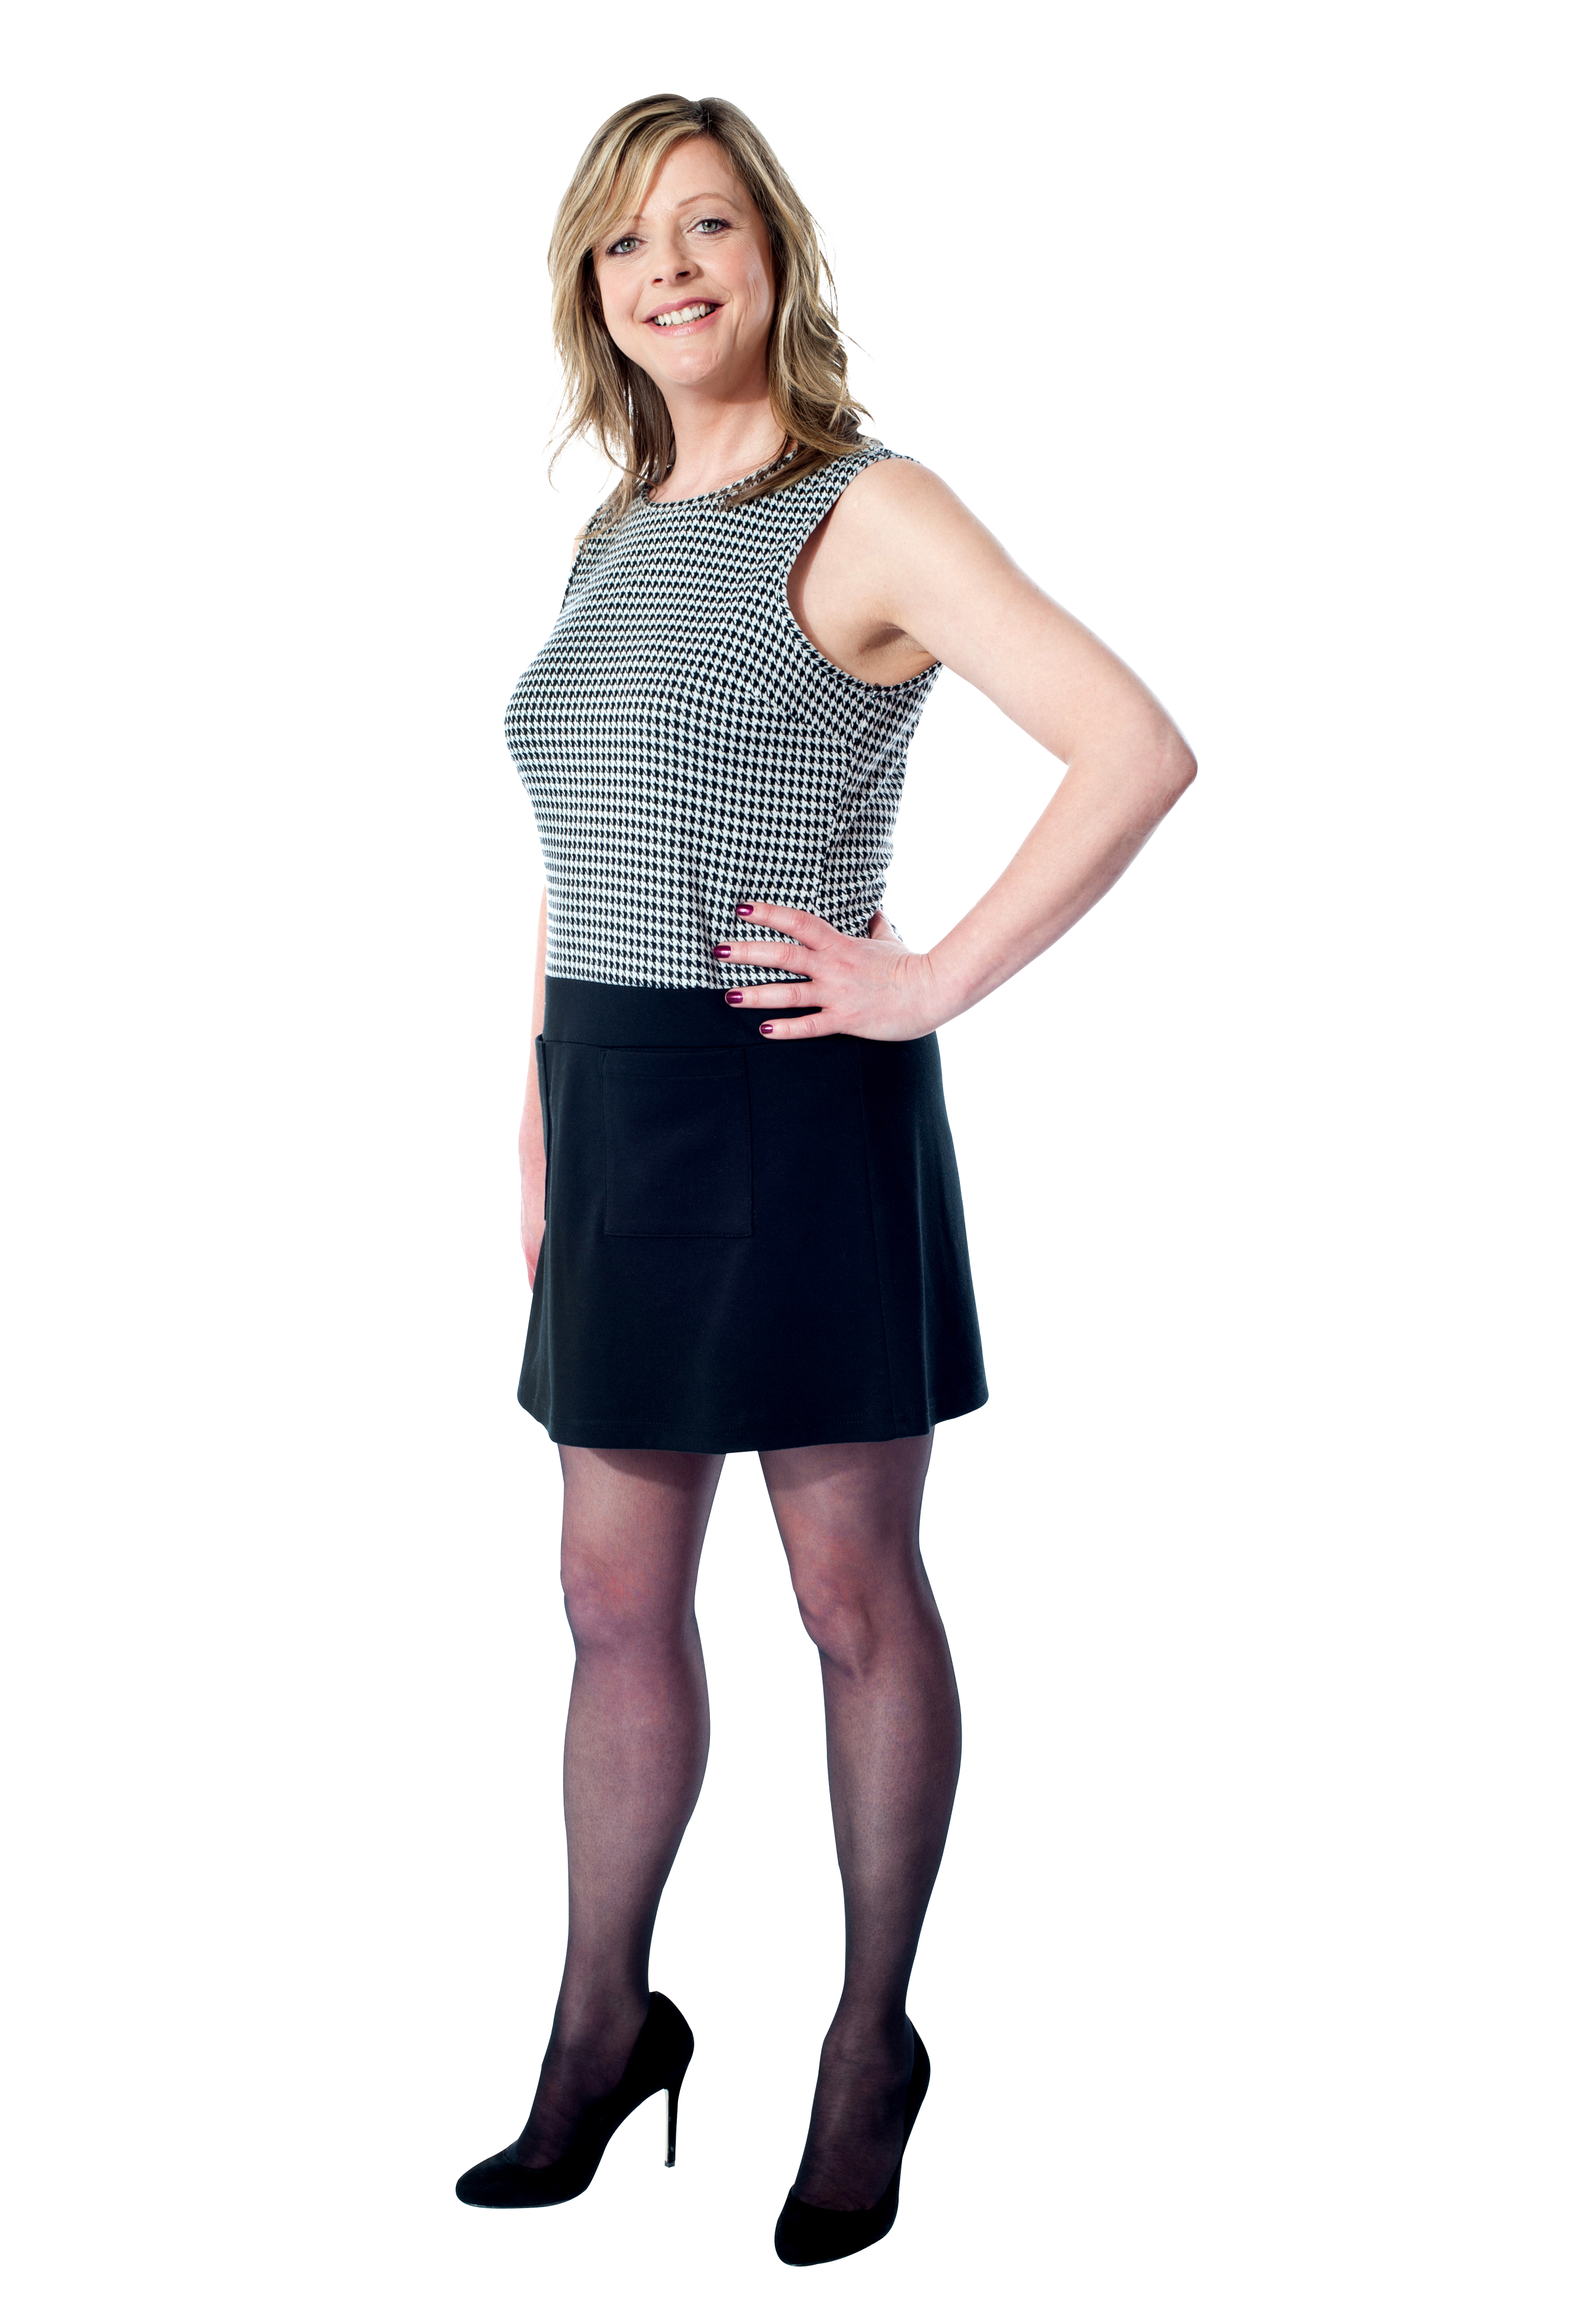 Download Standing Women PNG Image for Free